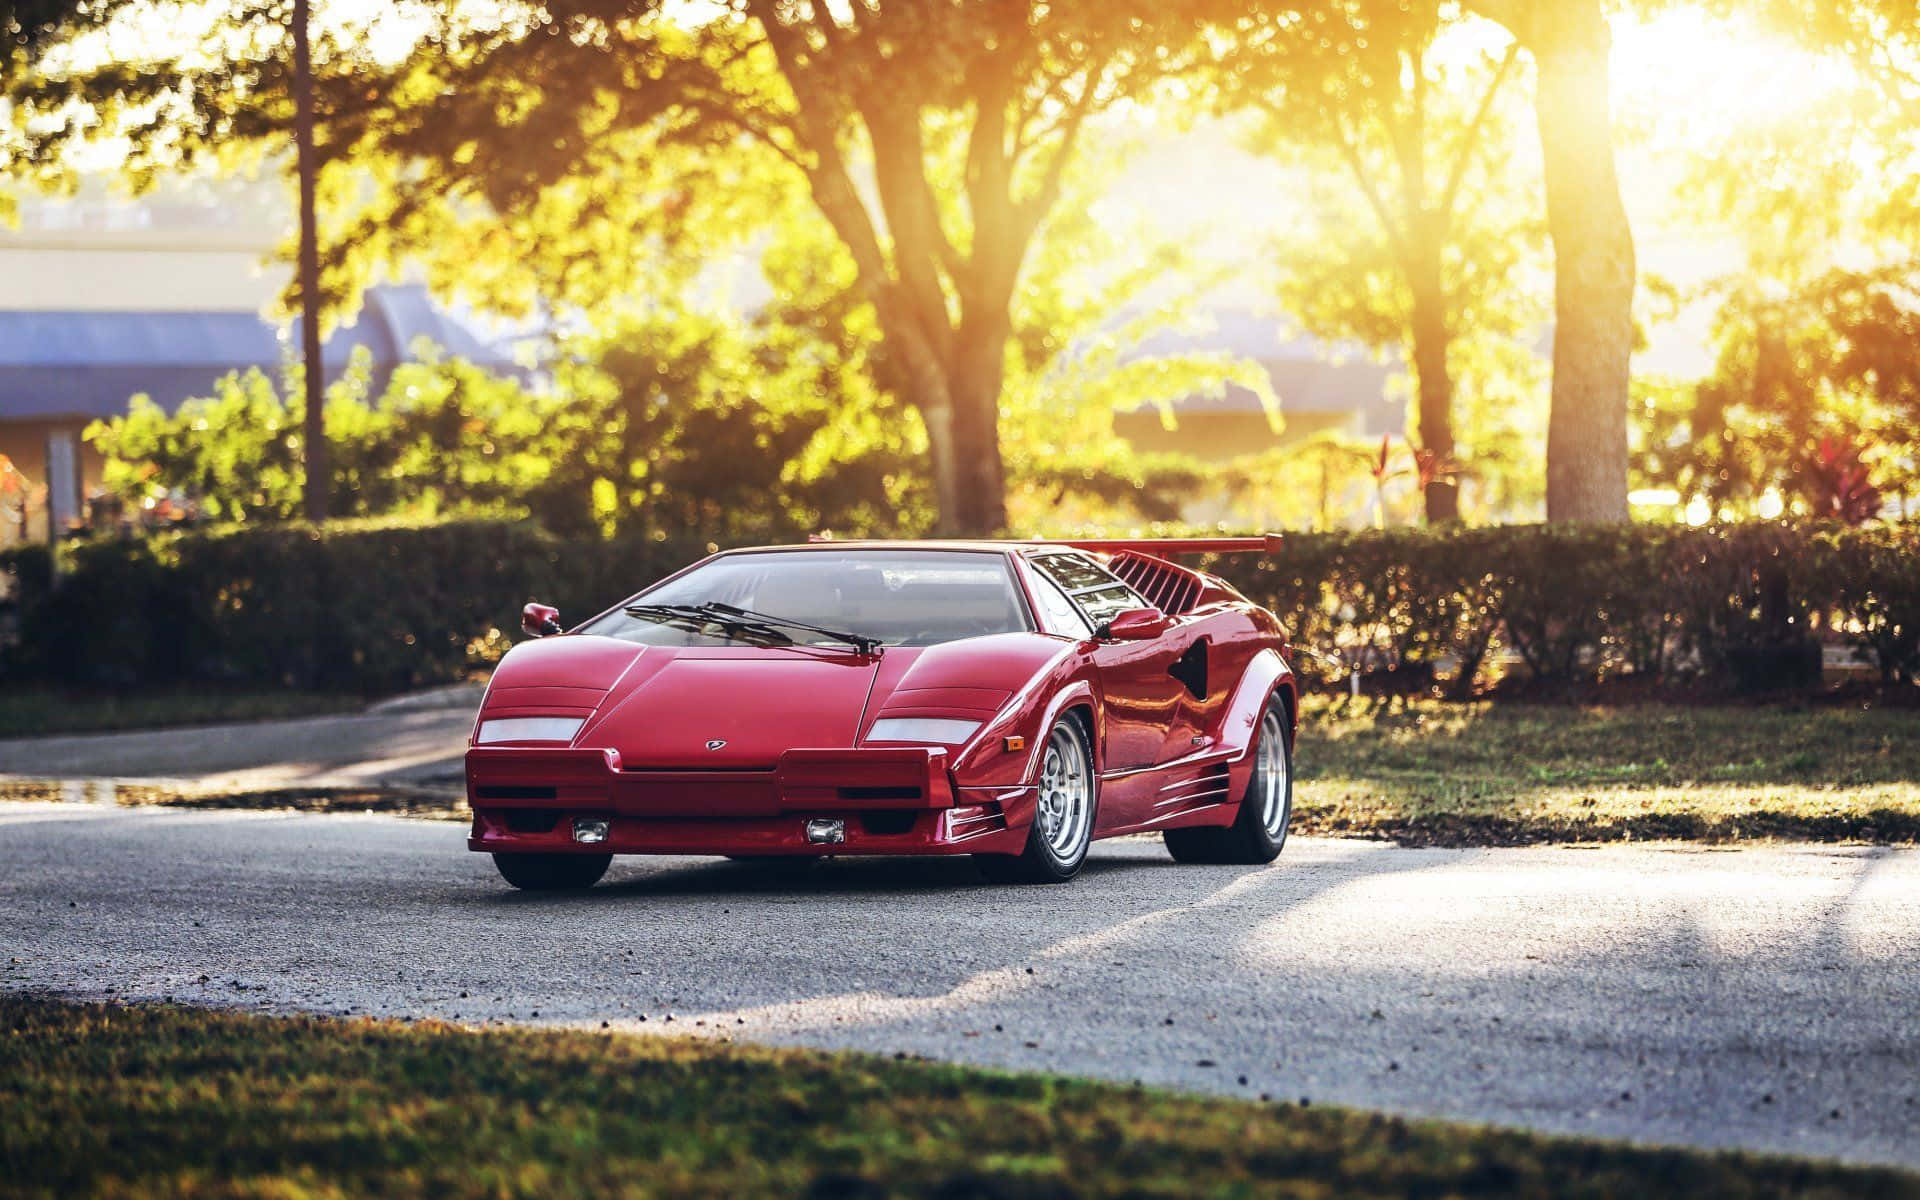 Experience Speed&Luxury with the Iconic Lamborghini Countach Wallpaper